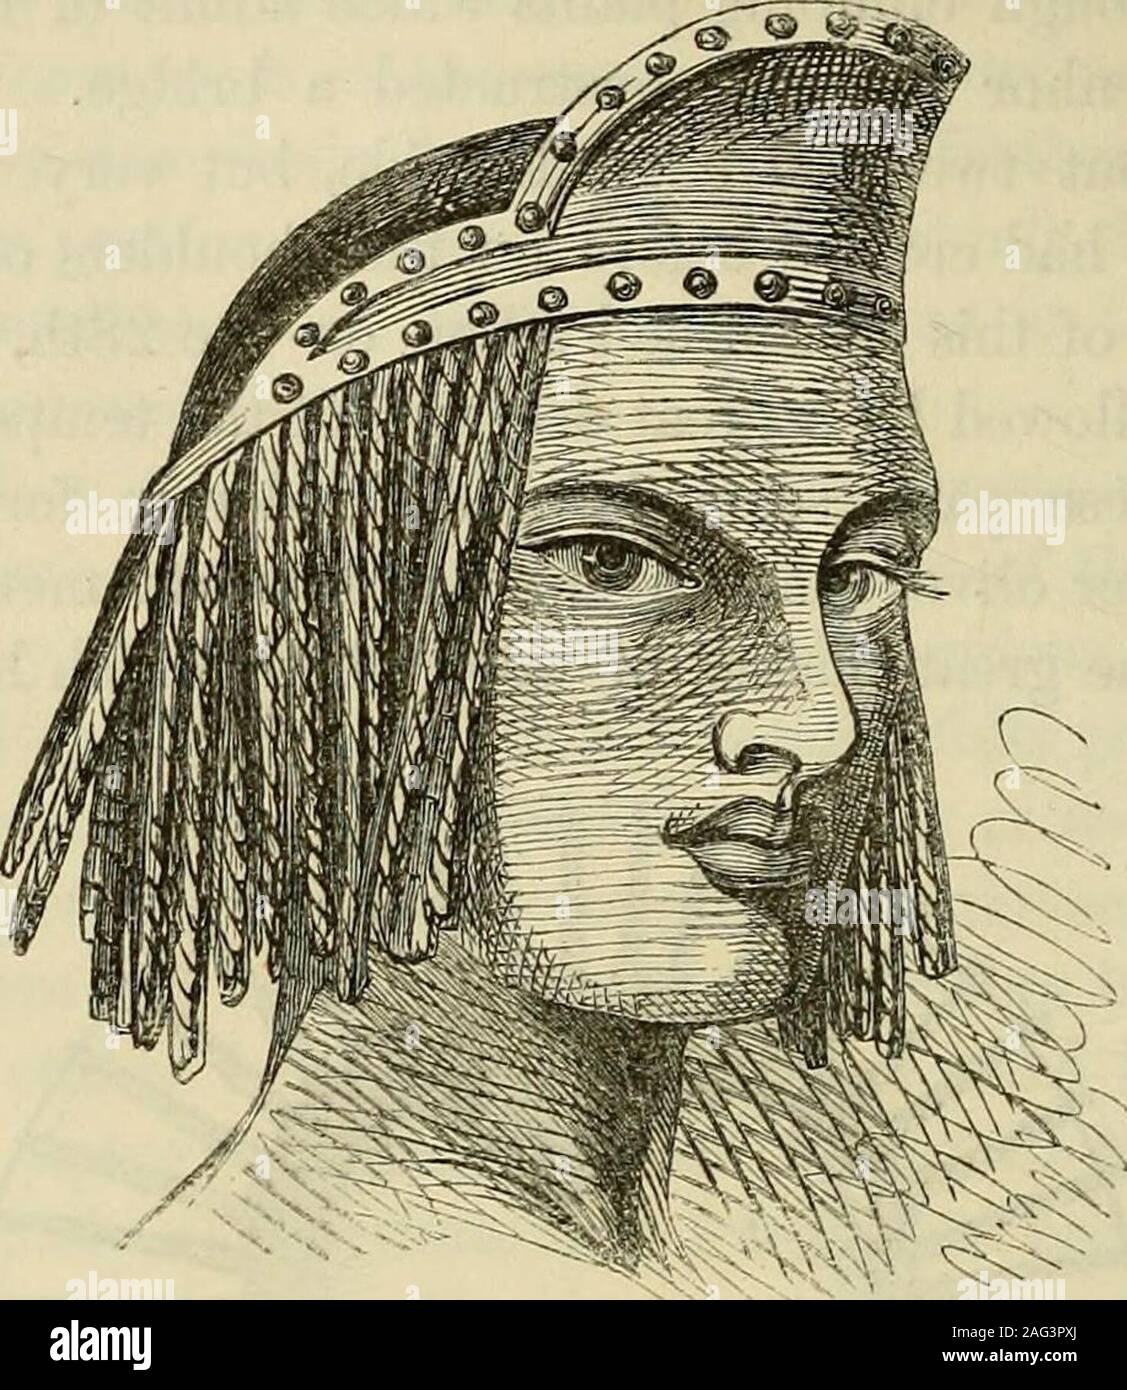 . Missionary travels and researches in South Africa : including a sketch of sixteen years' residence in the interior of Africa, and a journey from the Cape of Good Hope to Loanda, on the west coast, thence across the continent, down the river Zambesi, to the eastern ocean. No. 1. A Londa ladys mode of wearing the hair. shoulders, together with their general features, again remindedme of the ancient Egyptians. Several were seen with the upwardinclination of the outer angles of the eyes, but this was notgeneral. A few of the ladies adopt a curious custom of attachingthe hair to a hoop which enci Stock Photo